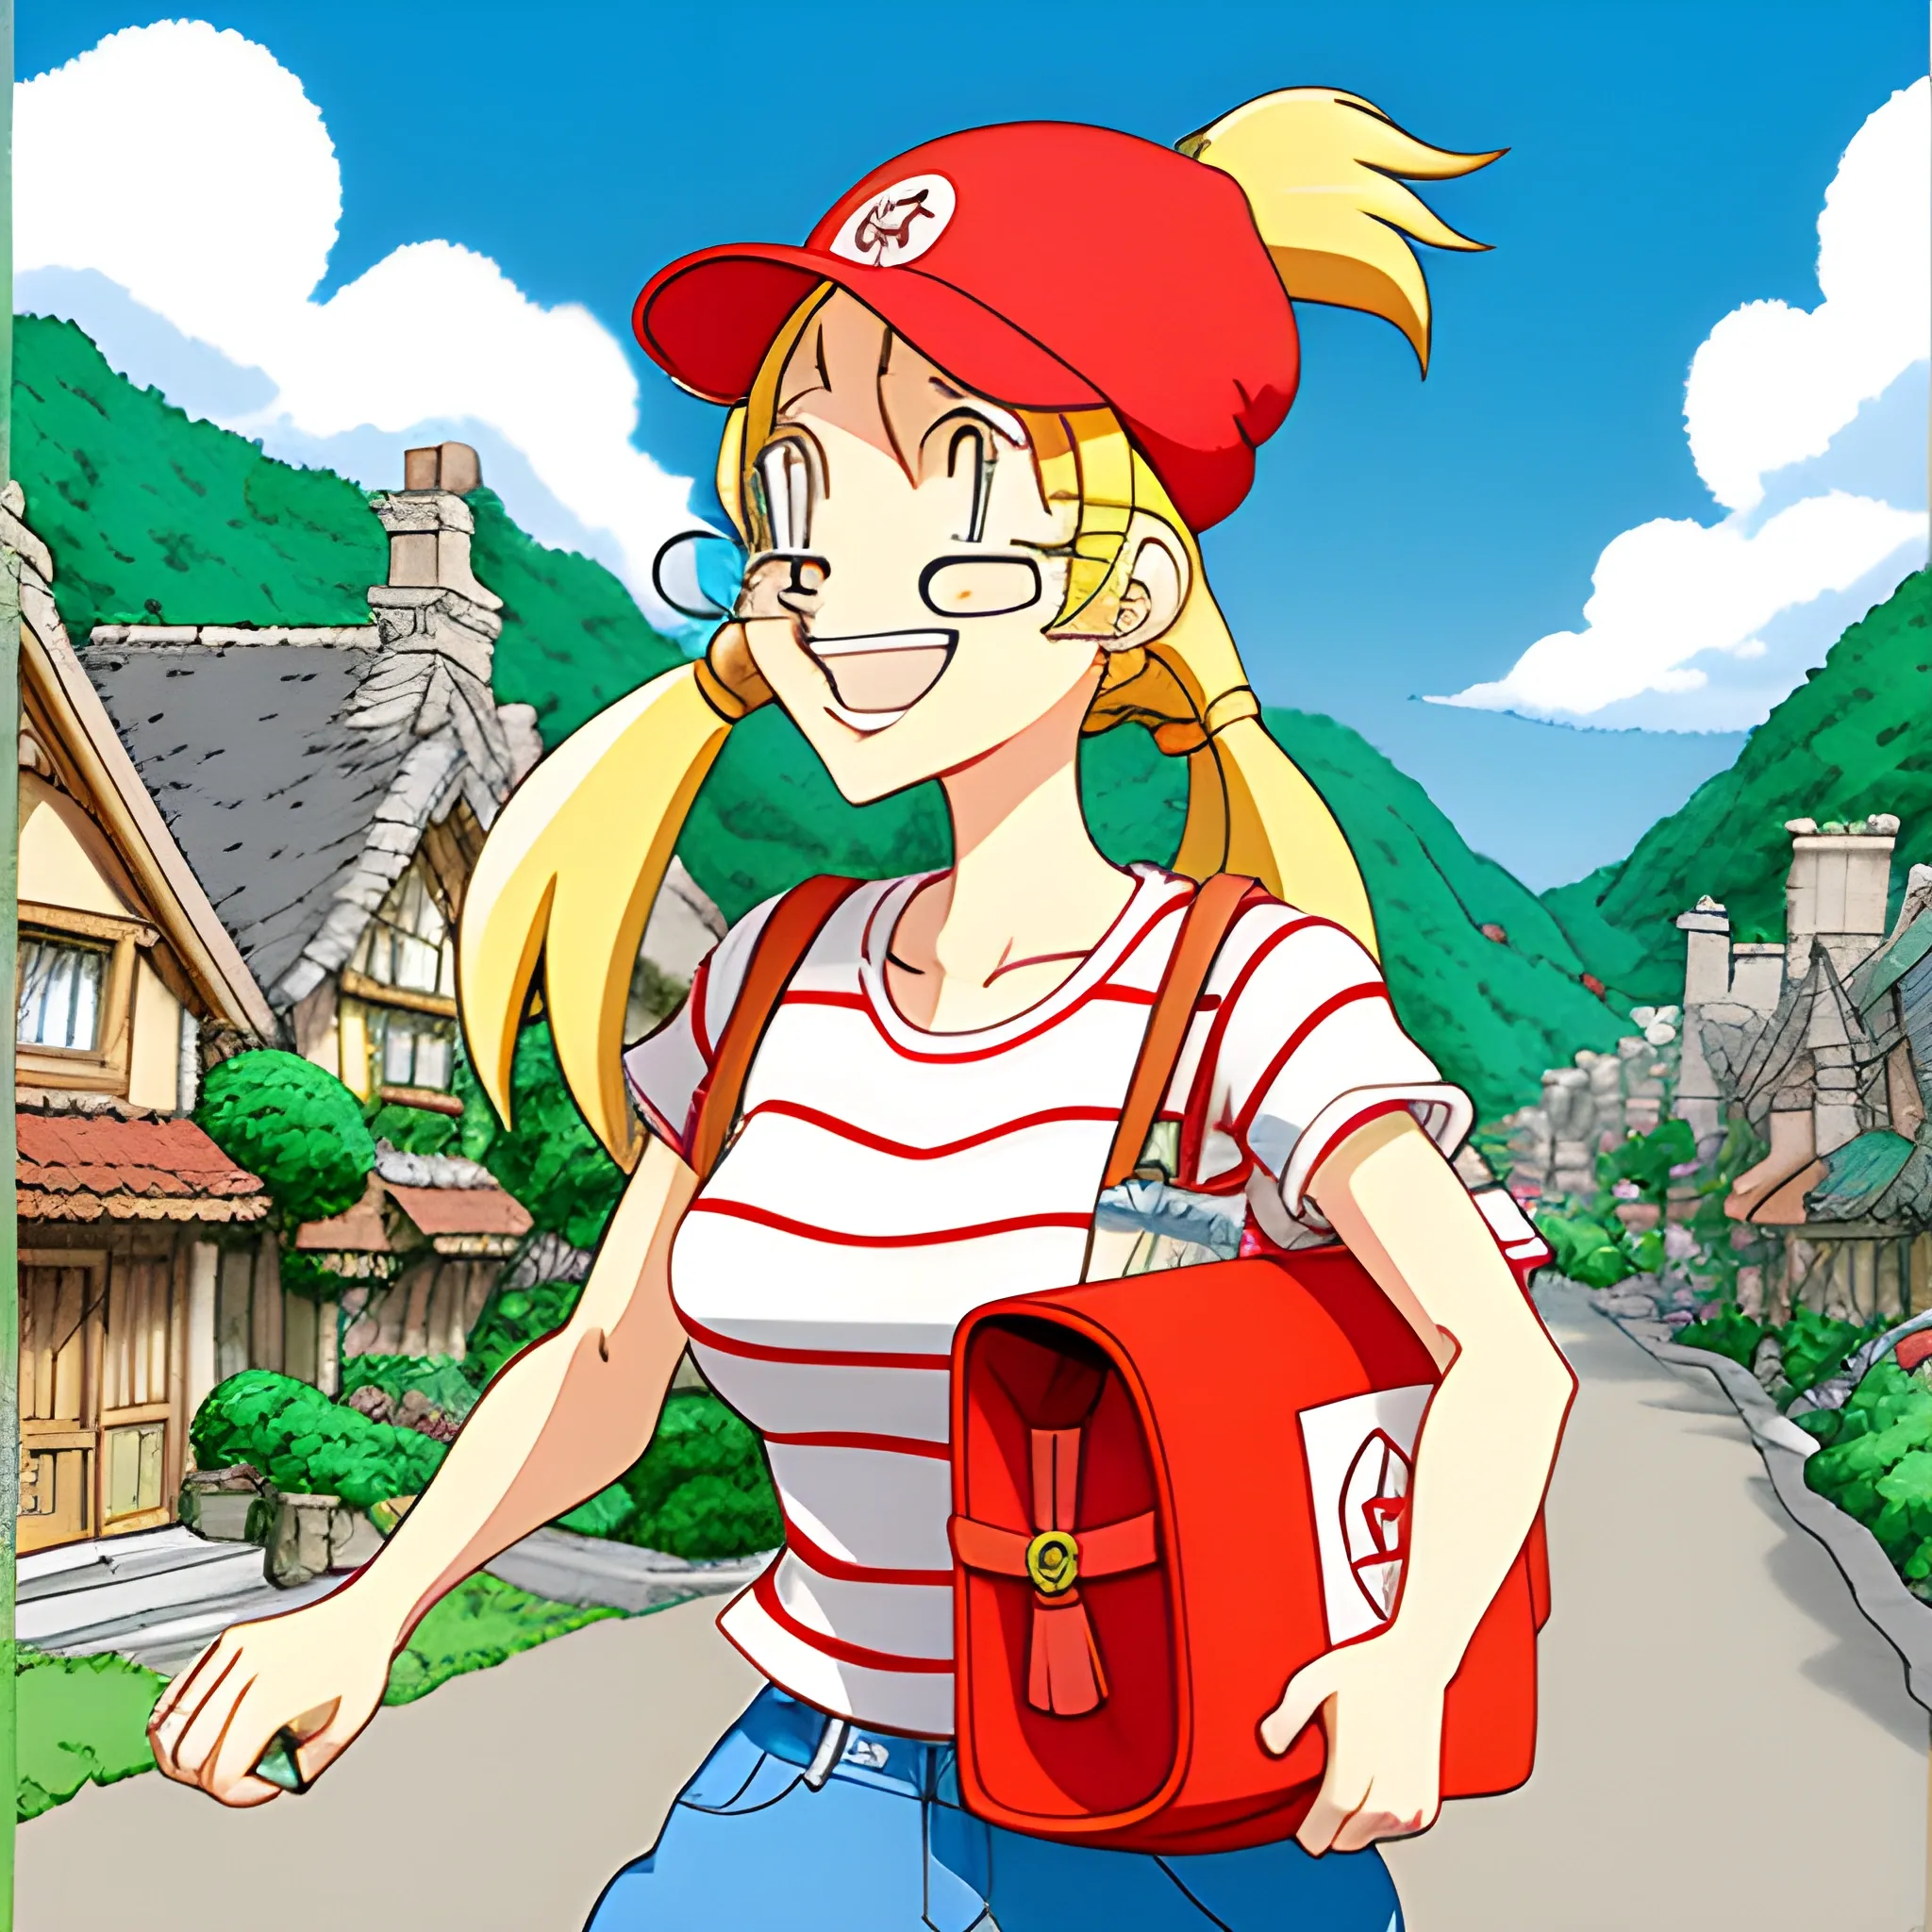 studio ghibli, where's waldo style,A very lively little girl named Keli has blonde hair and two ponytails. She runs around the village with a red schoolbag and a red hat every day, looking very happy and happy., Cartoon, Cartoon, Cartoon,five years old